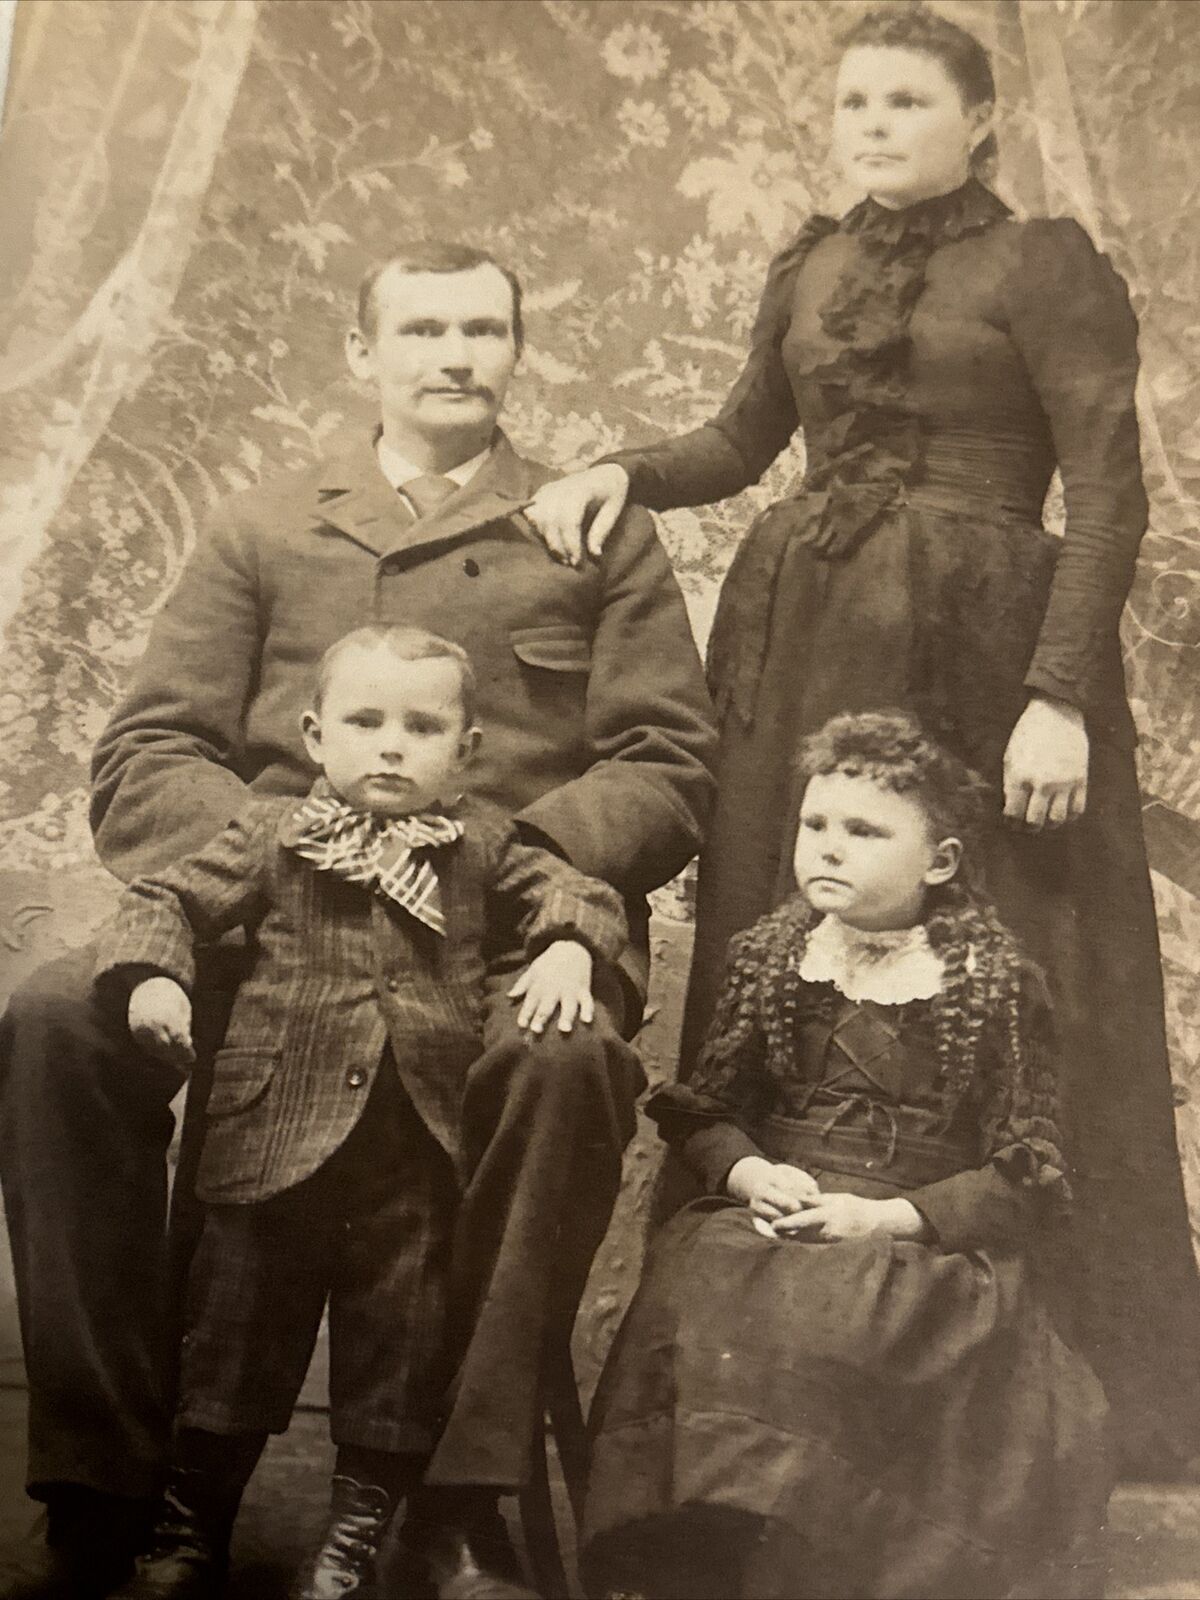 Cabinet Card Photo of Victorian Era Family w/ Two Young Children Circa 1880’s